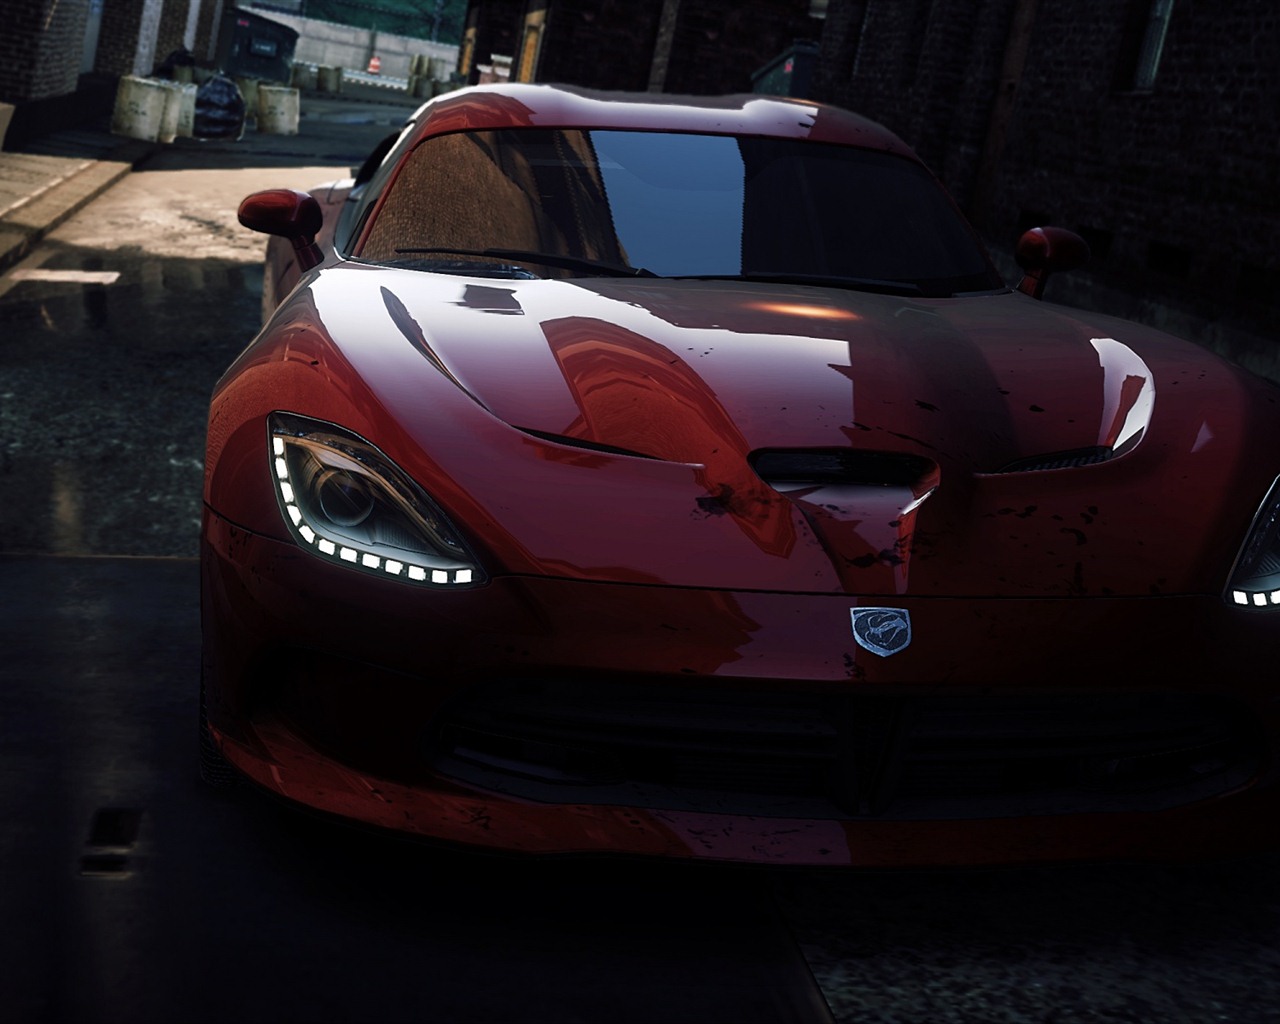 Need for Speed: Most Wanted 极品飞车17：最高通缉 高清壁纸2 - 1280x1024